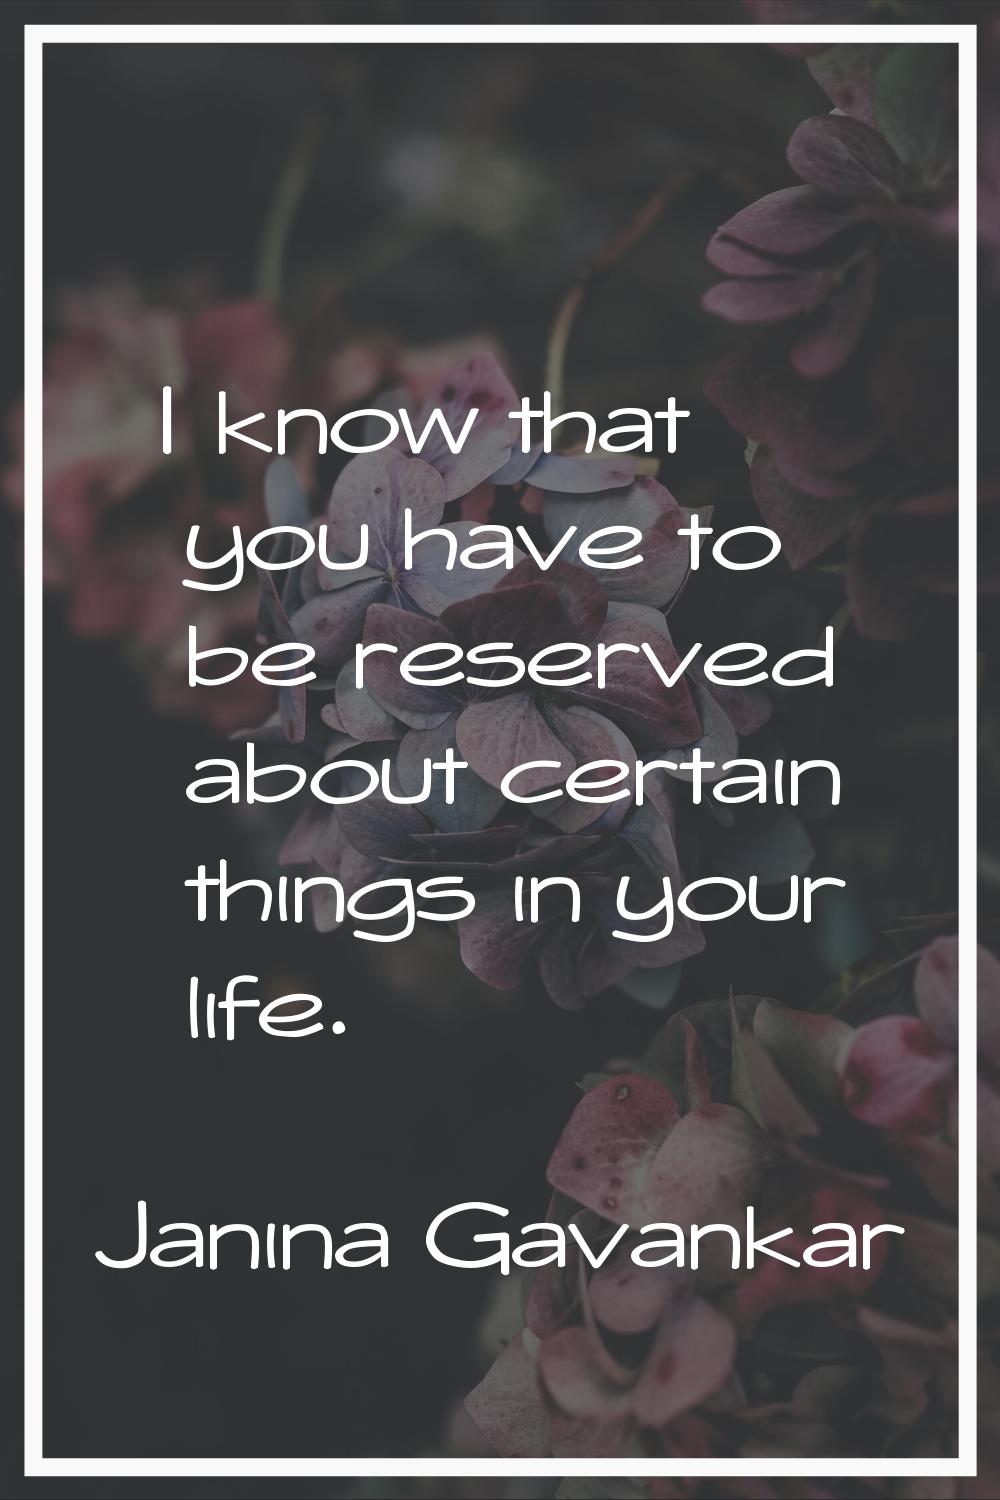 I know that you have to be reserved about certain things in your life.